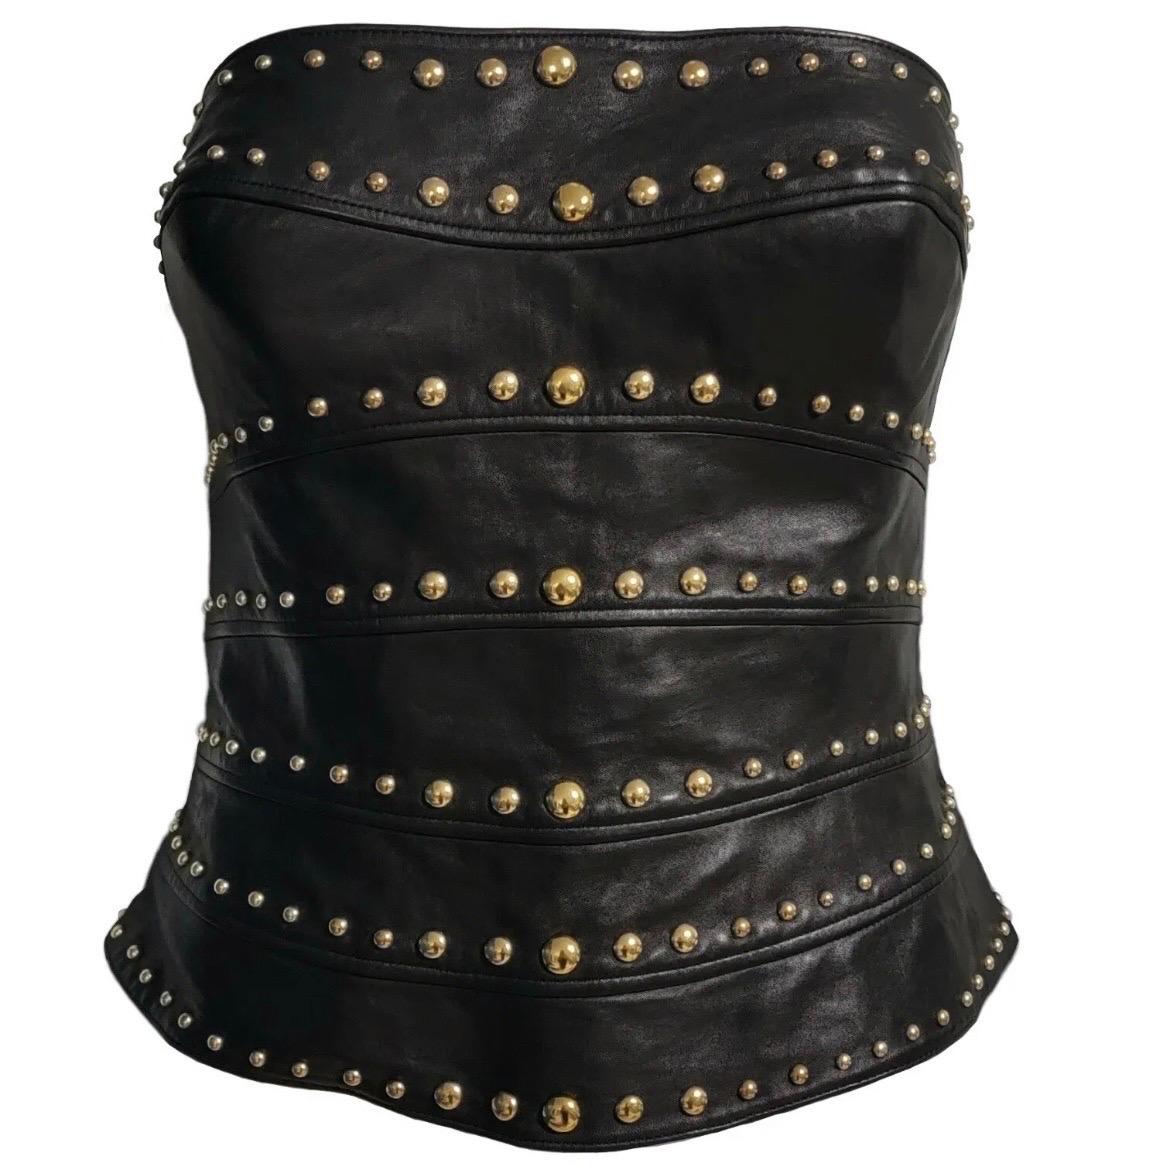 Incredible 1990's Thierry Mugler Couture strapless black leather studded bustier top.
The inside is lined and boned with a built in corset with cups to add shape and there is a fabric strap inside that goes around the waist for extra support.
Gold